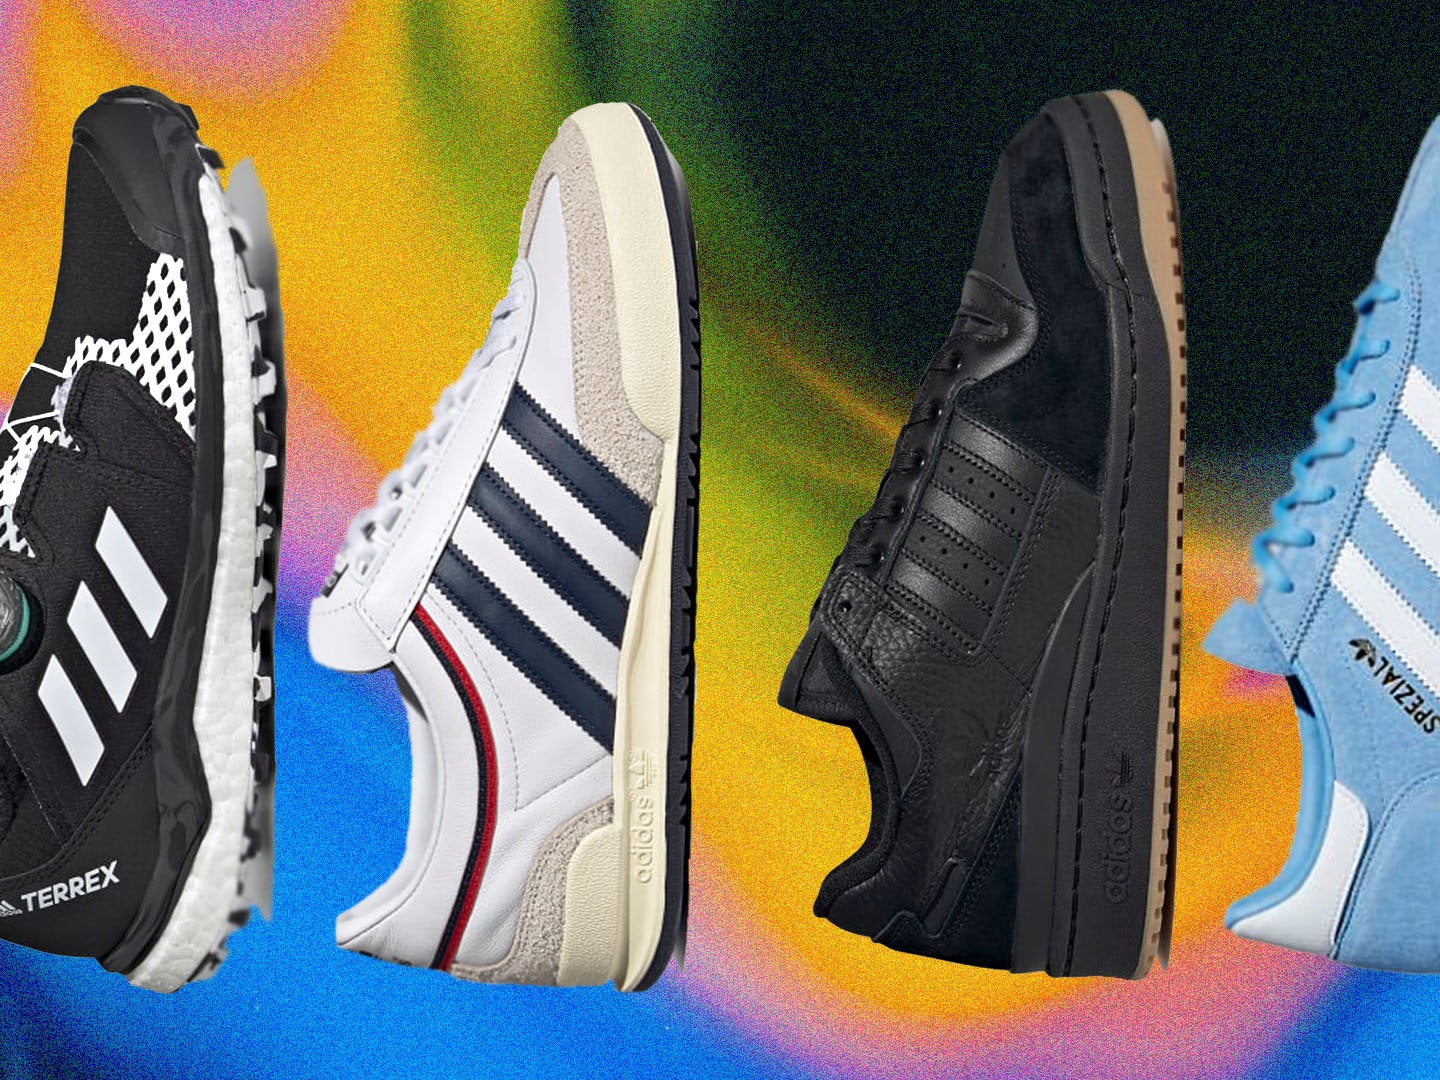 Best Adidas shoes 2021: from Sambas to NMDs